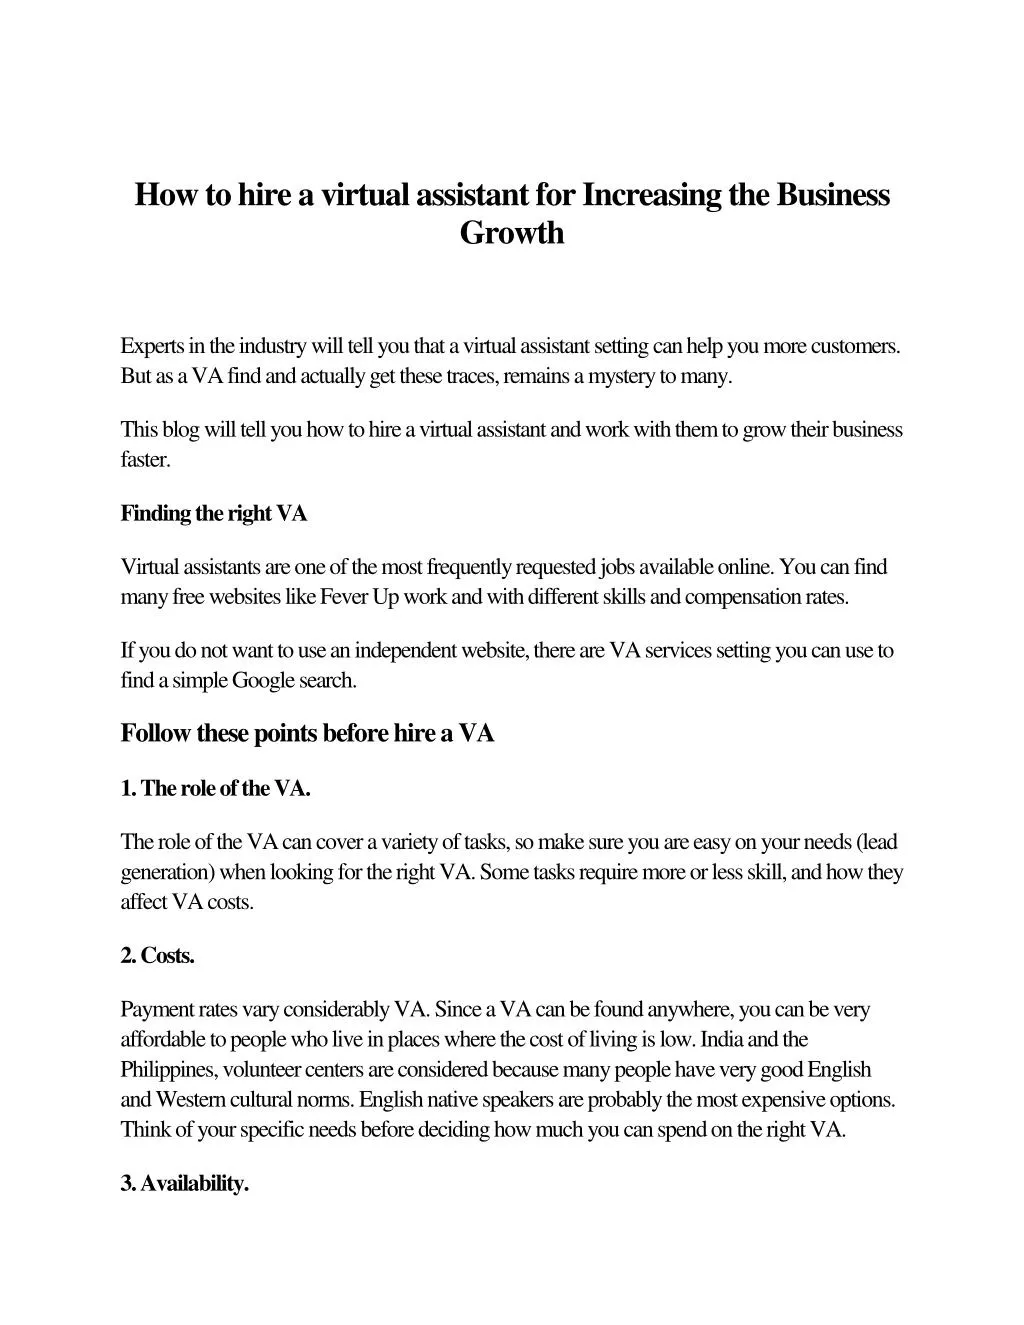 how to hire a virtual assistant for increasing